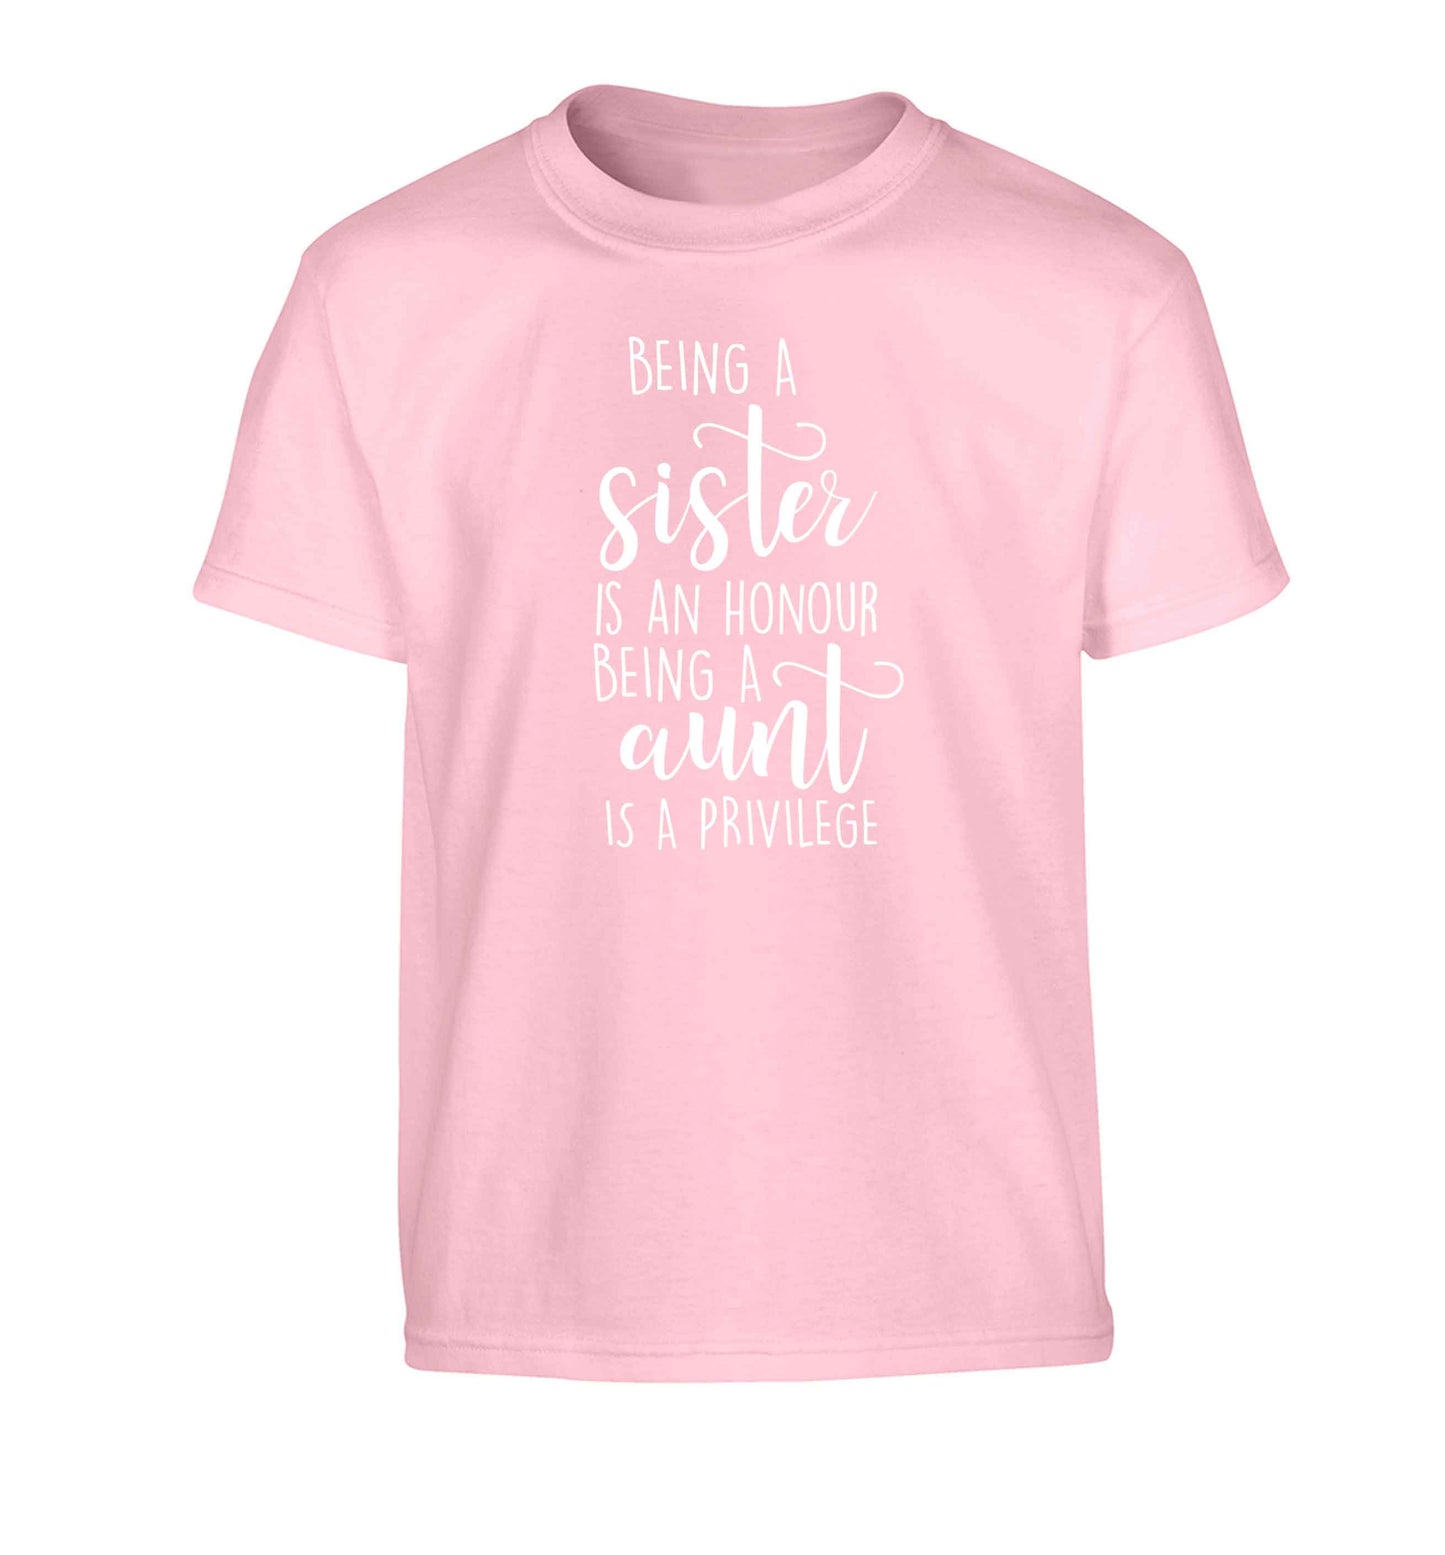 Being a sister is an honour being an auntie is a privilege Children's light pink Tshirt 12-13 Years